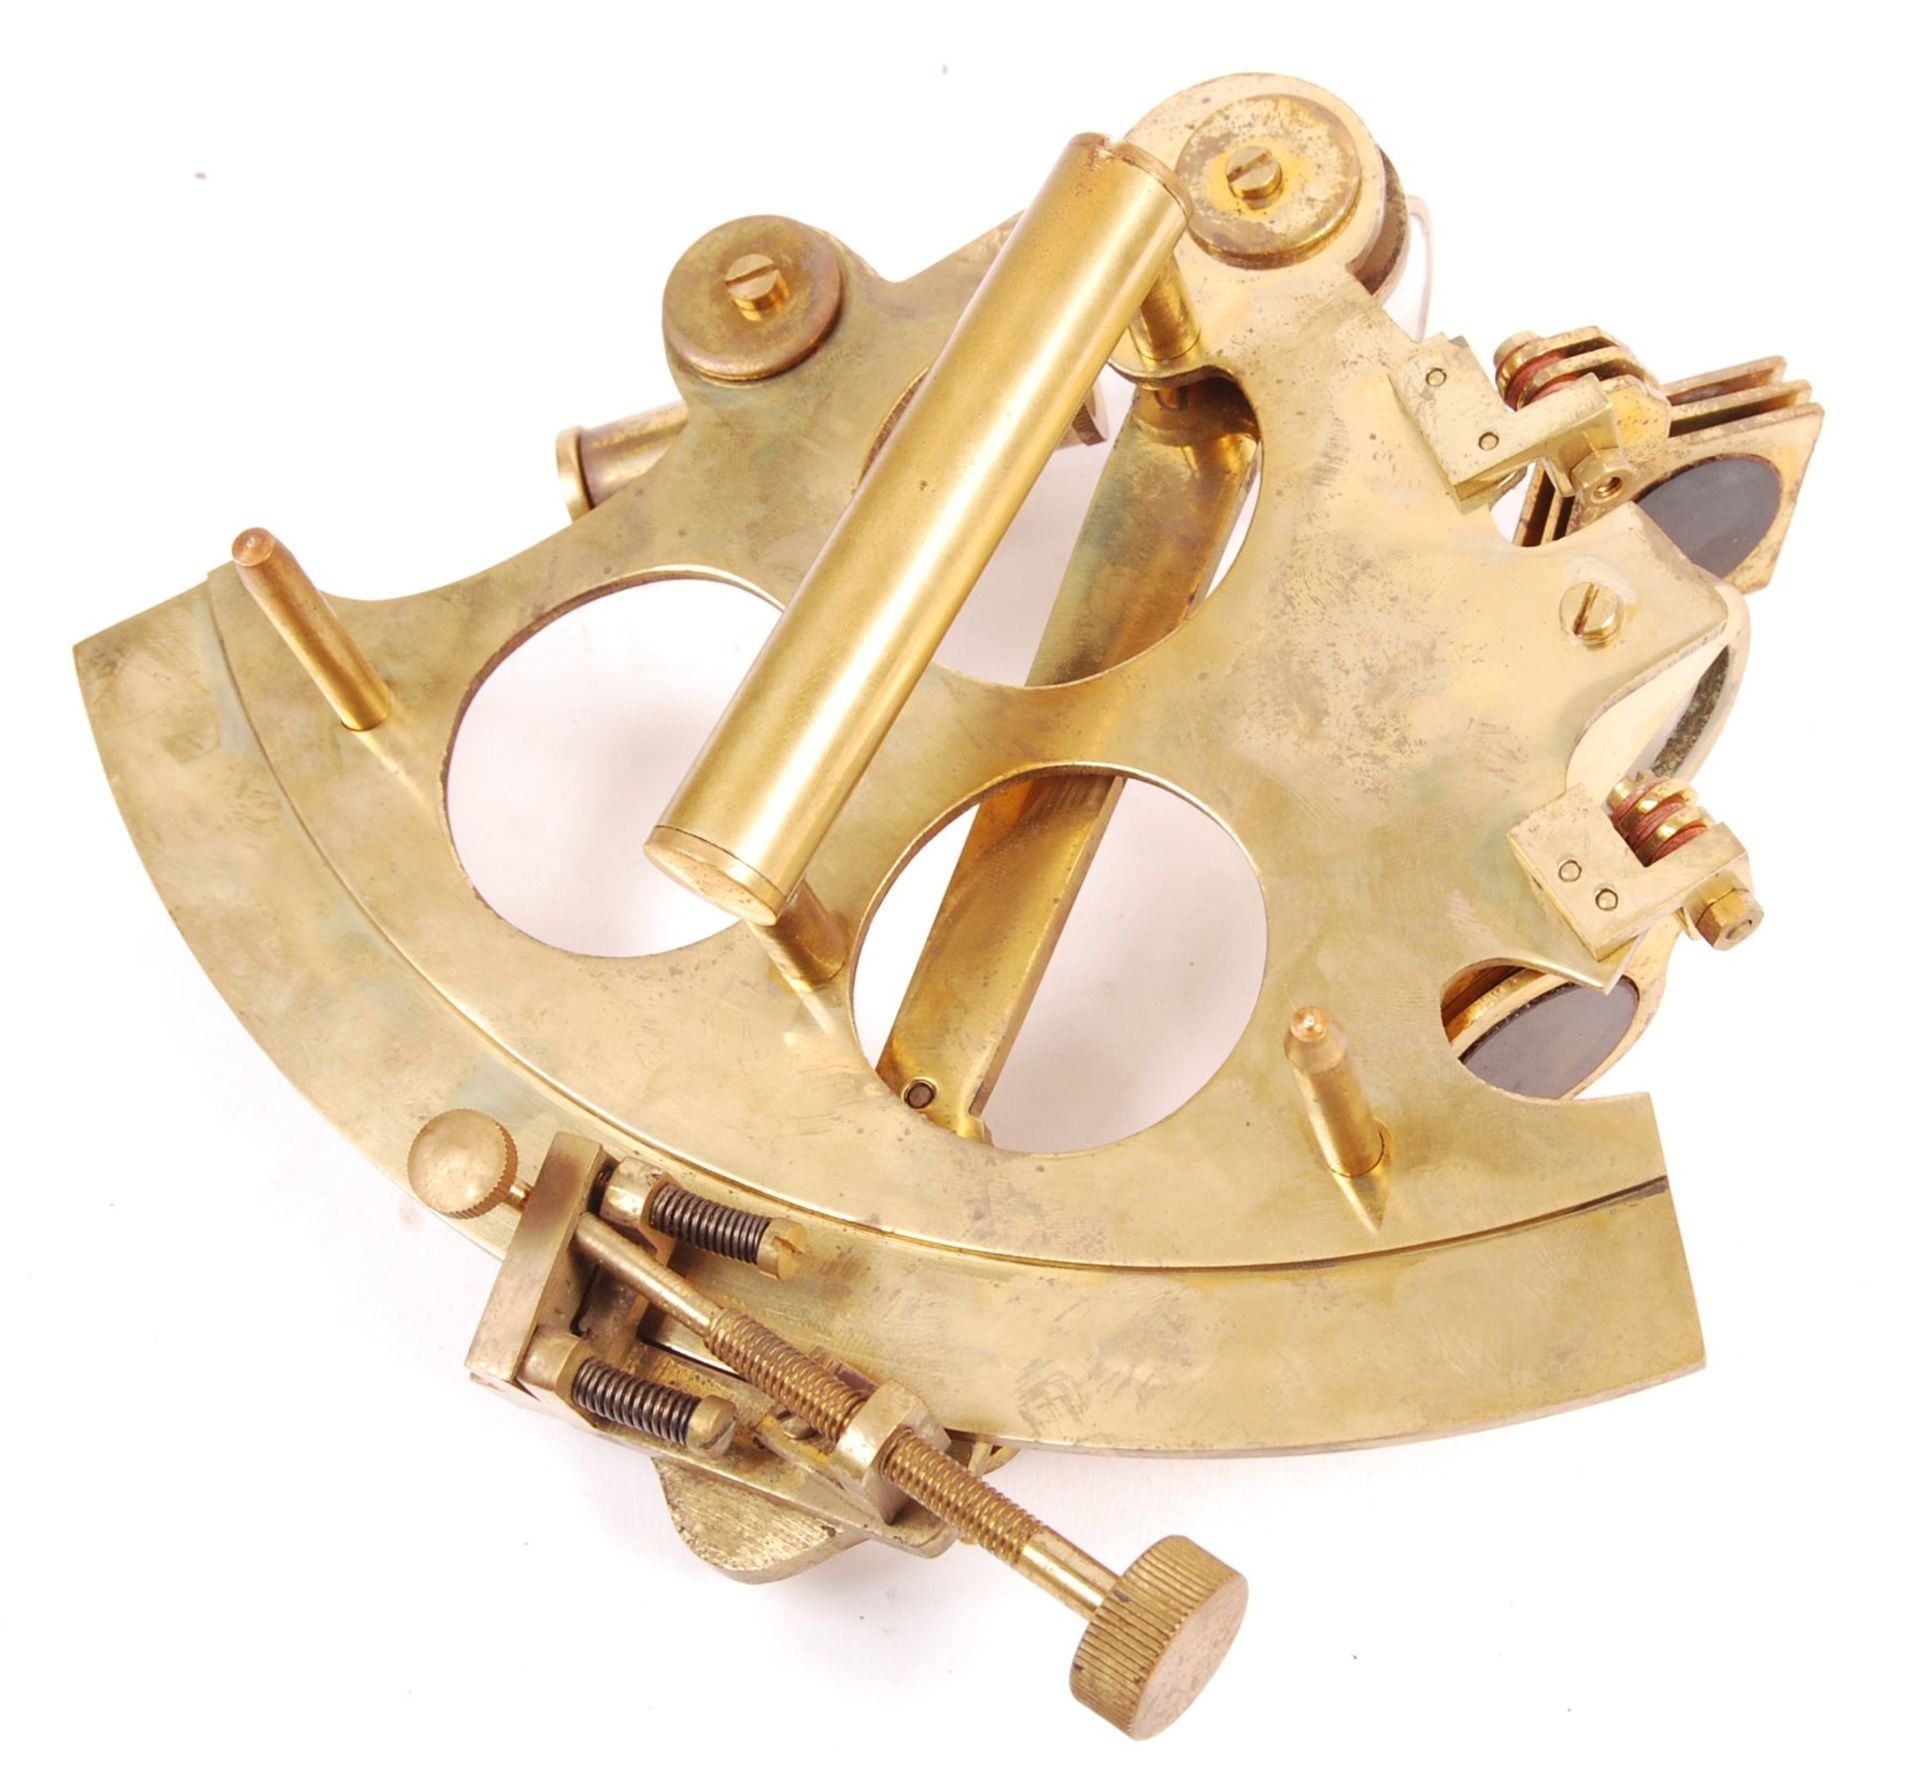 20TH CENTURY MILITARY BRASS NAVIGATIONAL SEXTANT INSTRUMENT - Image 3 of 3